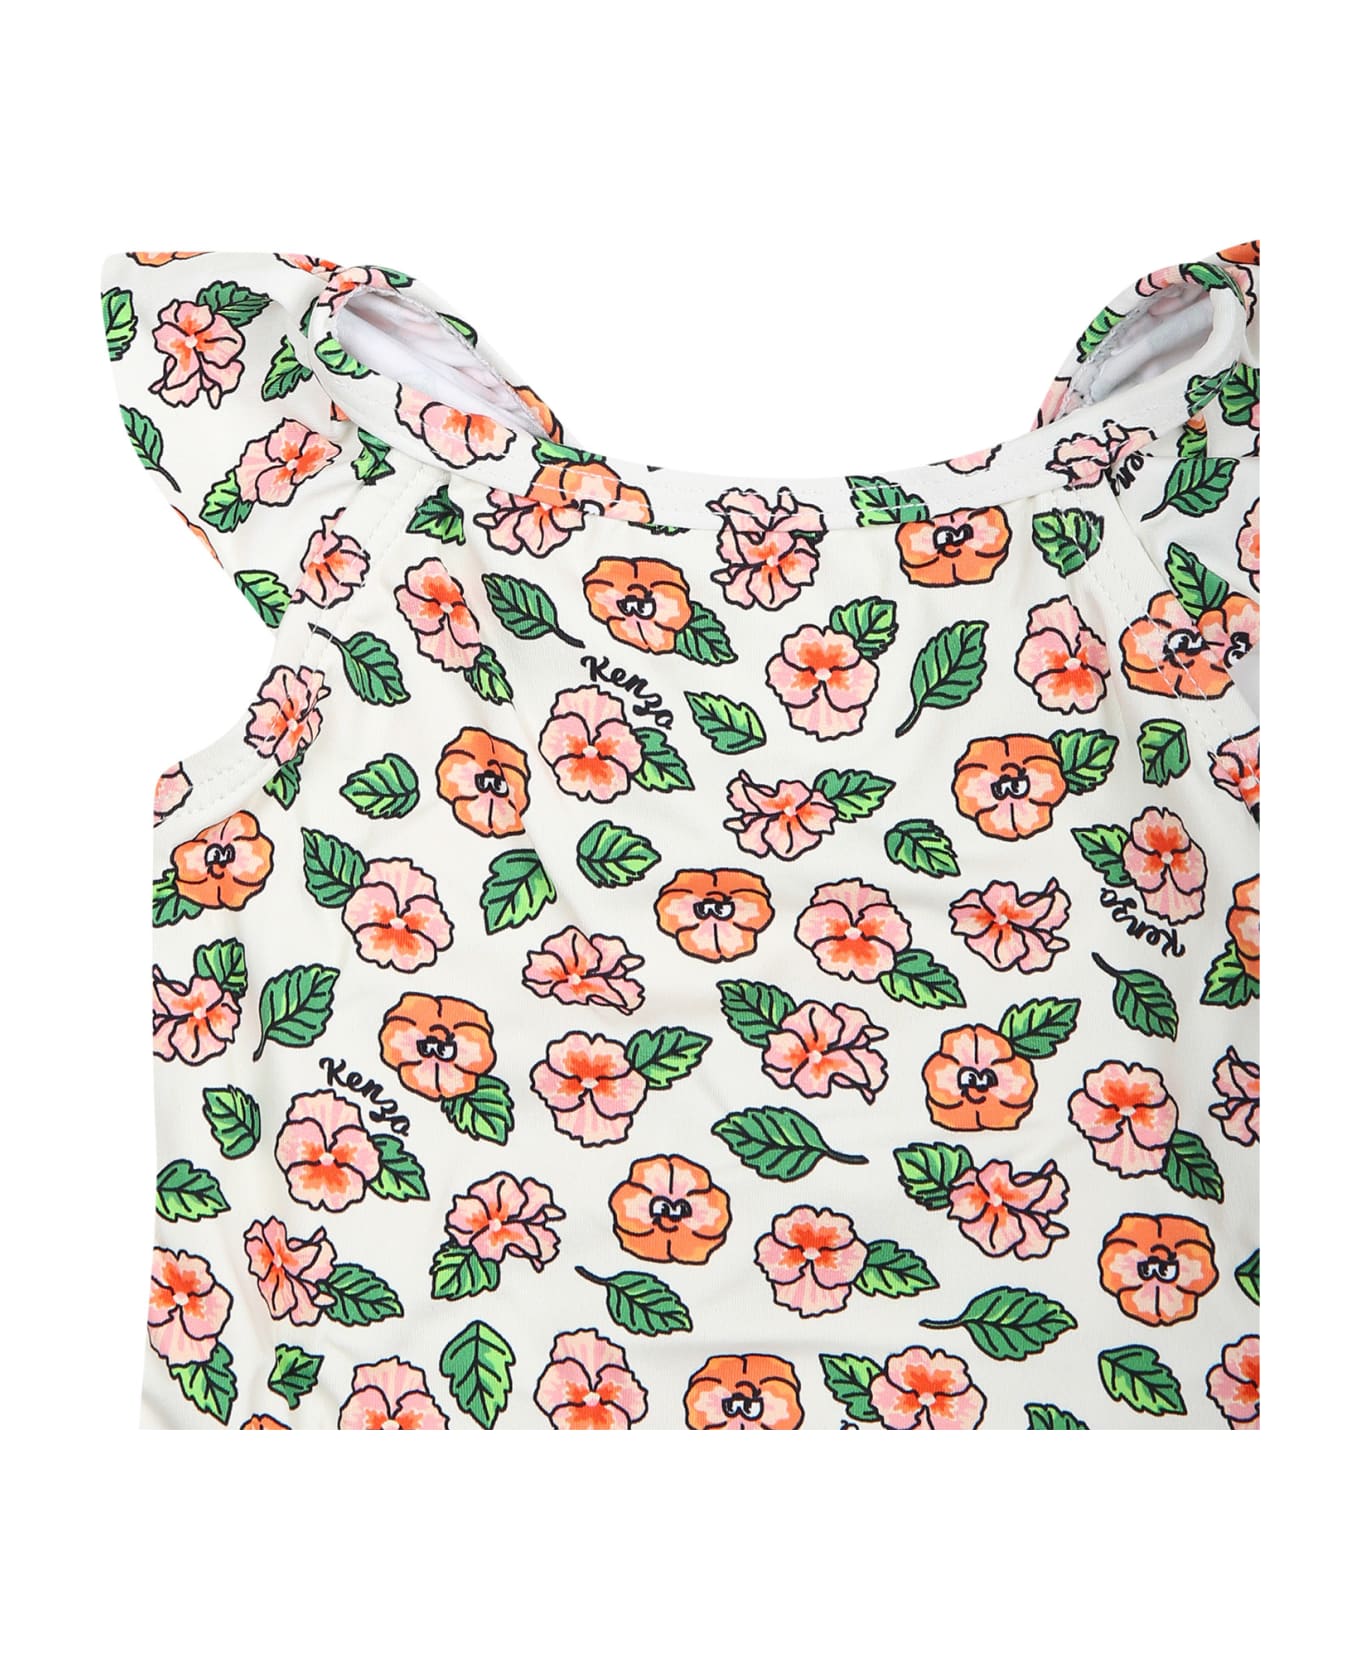 Kenzo Kids White Swimwuit For Baby Girl With Floral Print - White